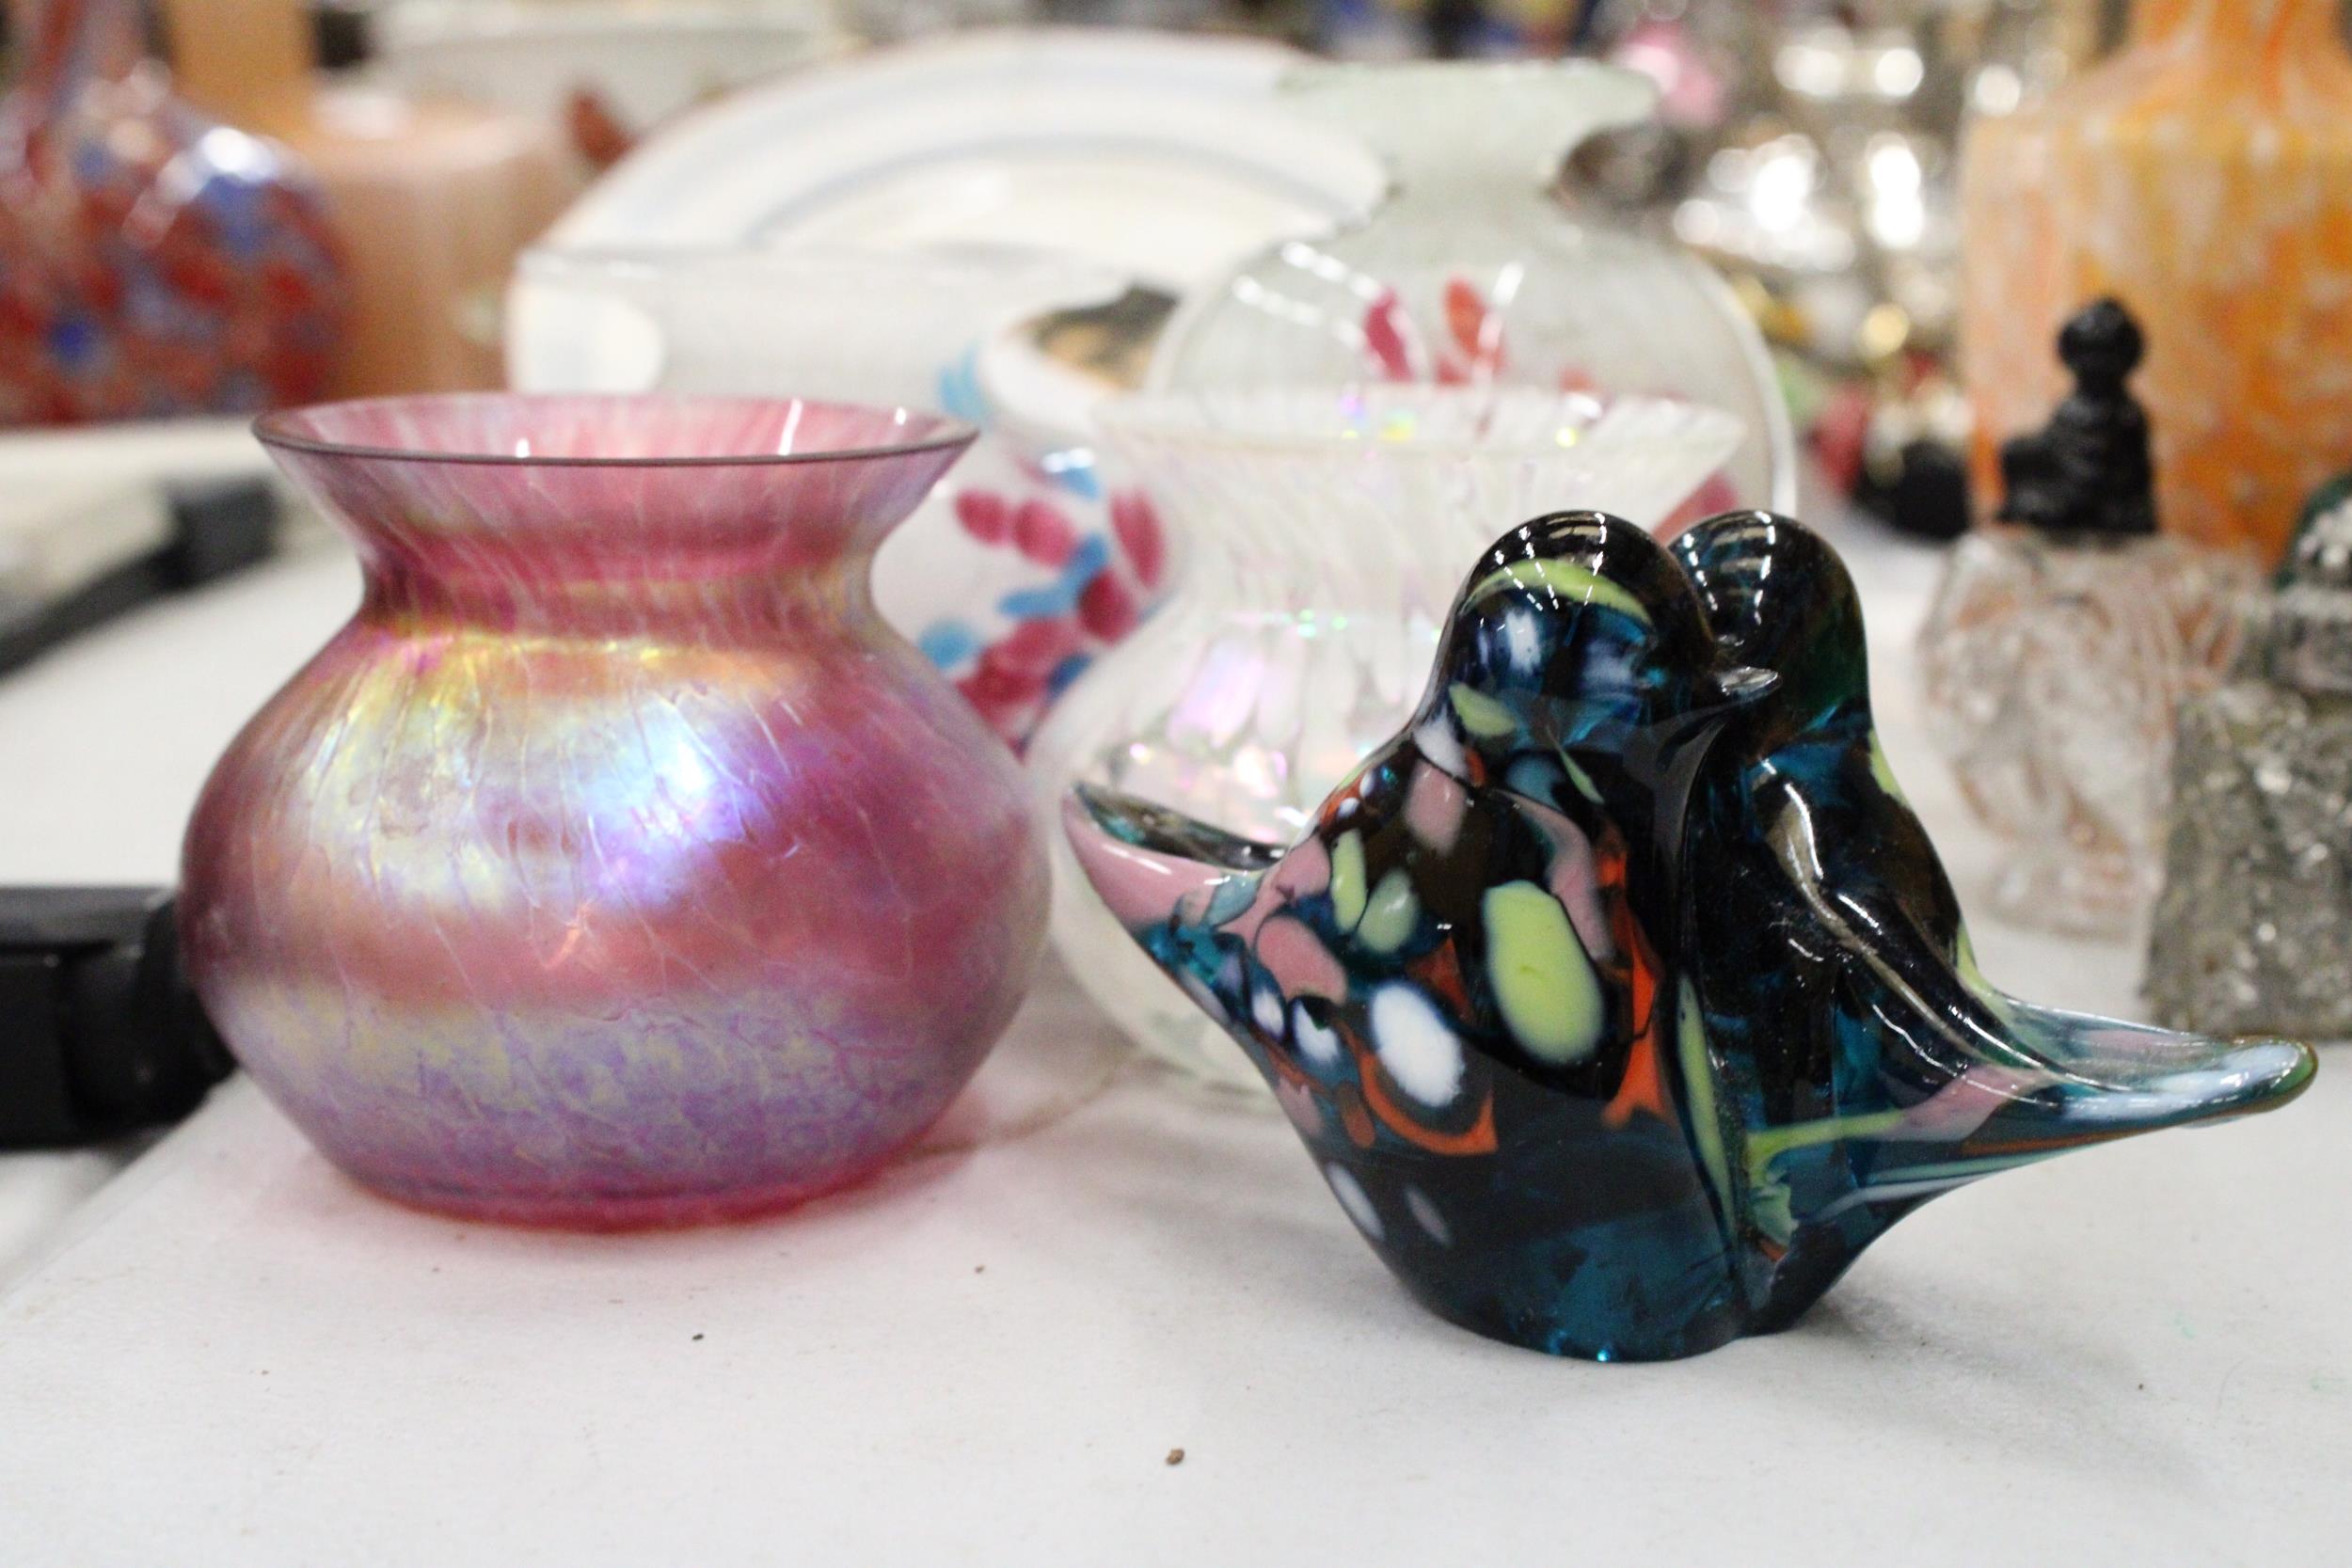 TWO M'DINA VASES, A LOVEBIRDS PAPERWEIGHT AND TWO IRRIDESENT VASES - Image 2 of 4